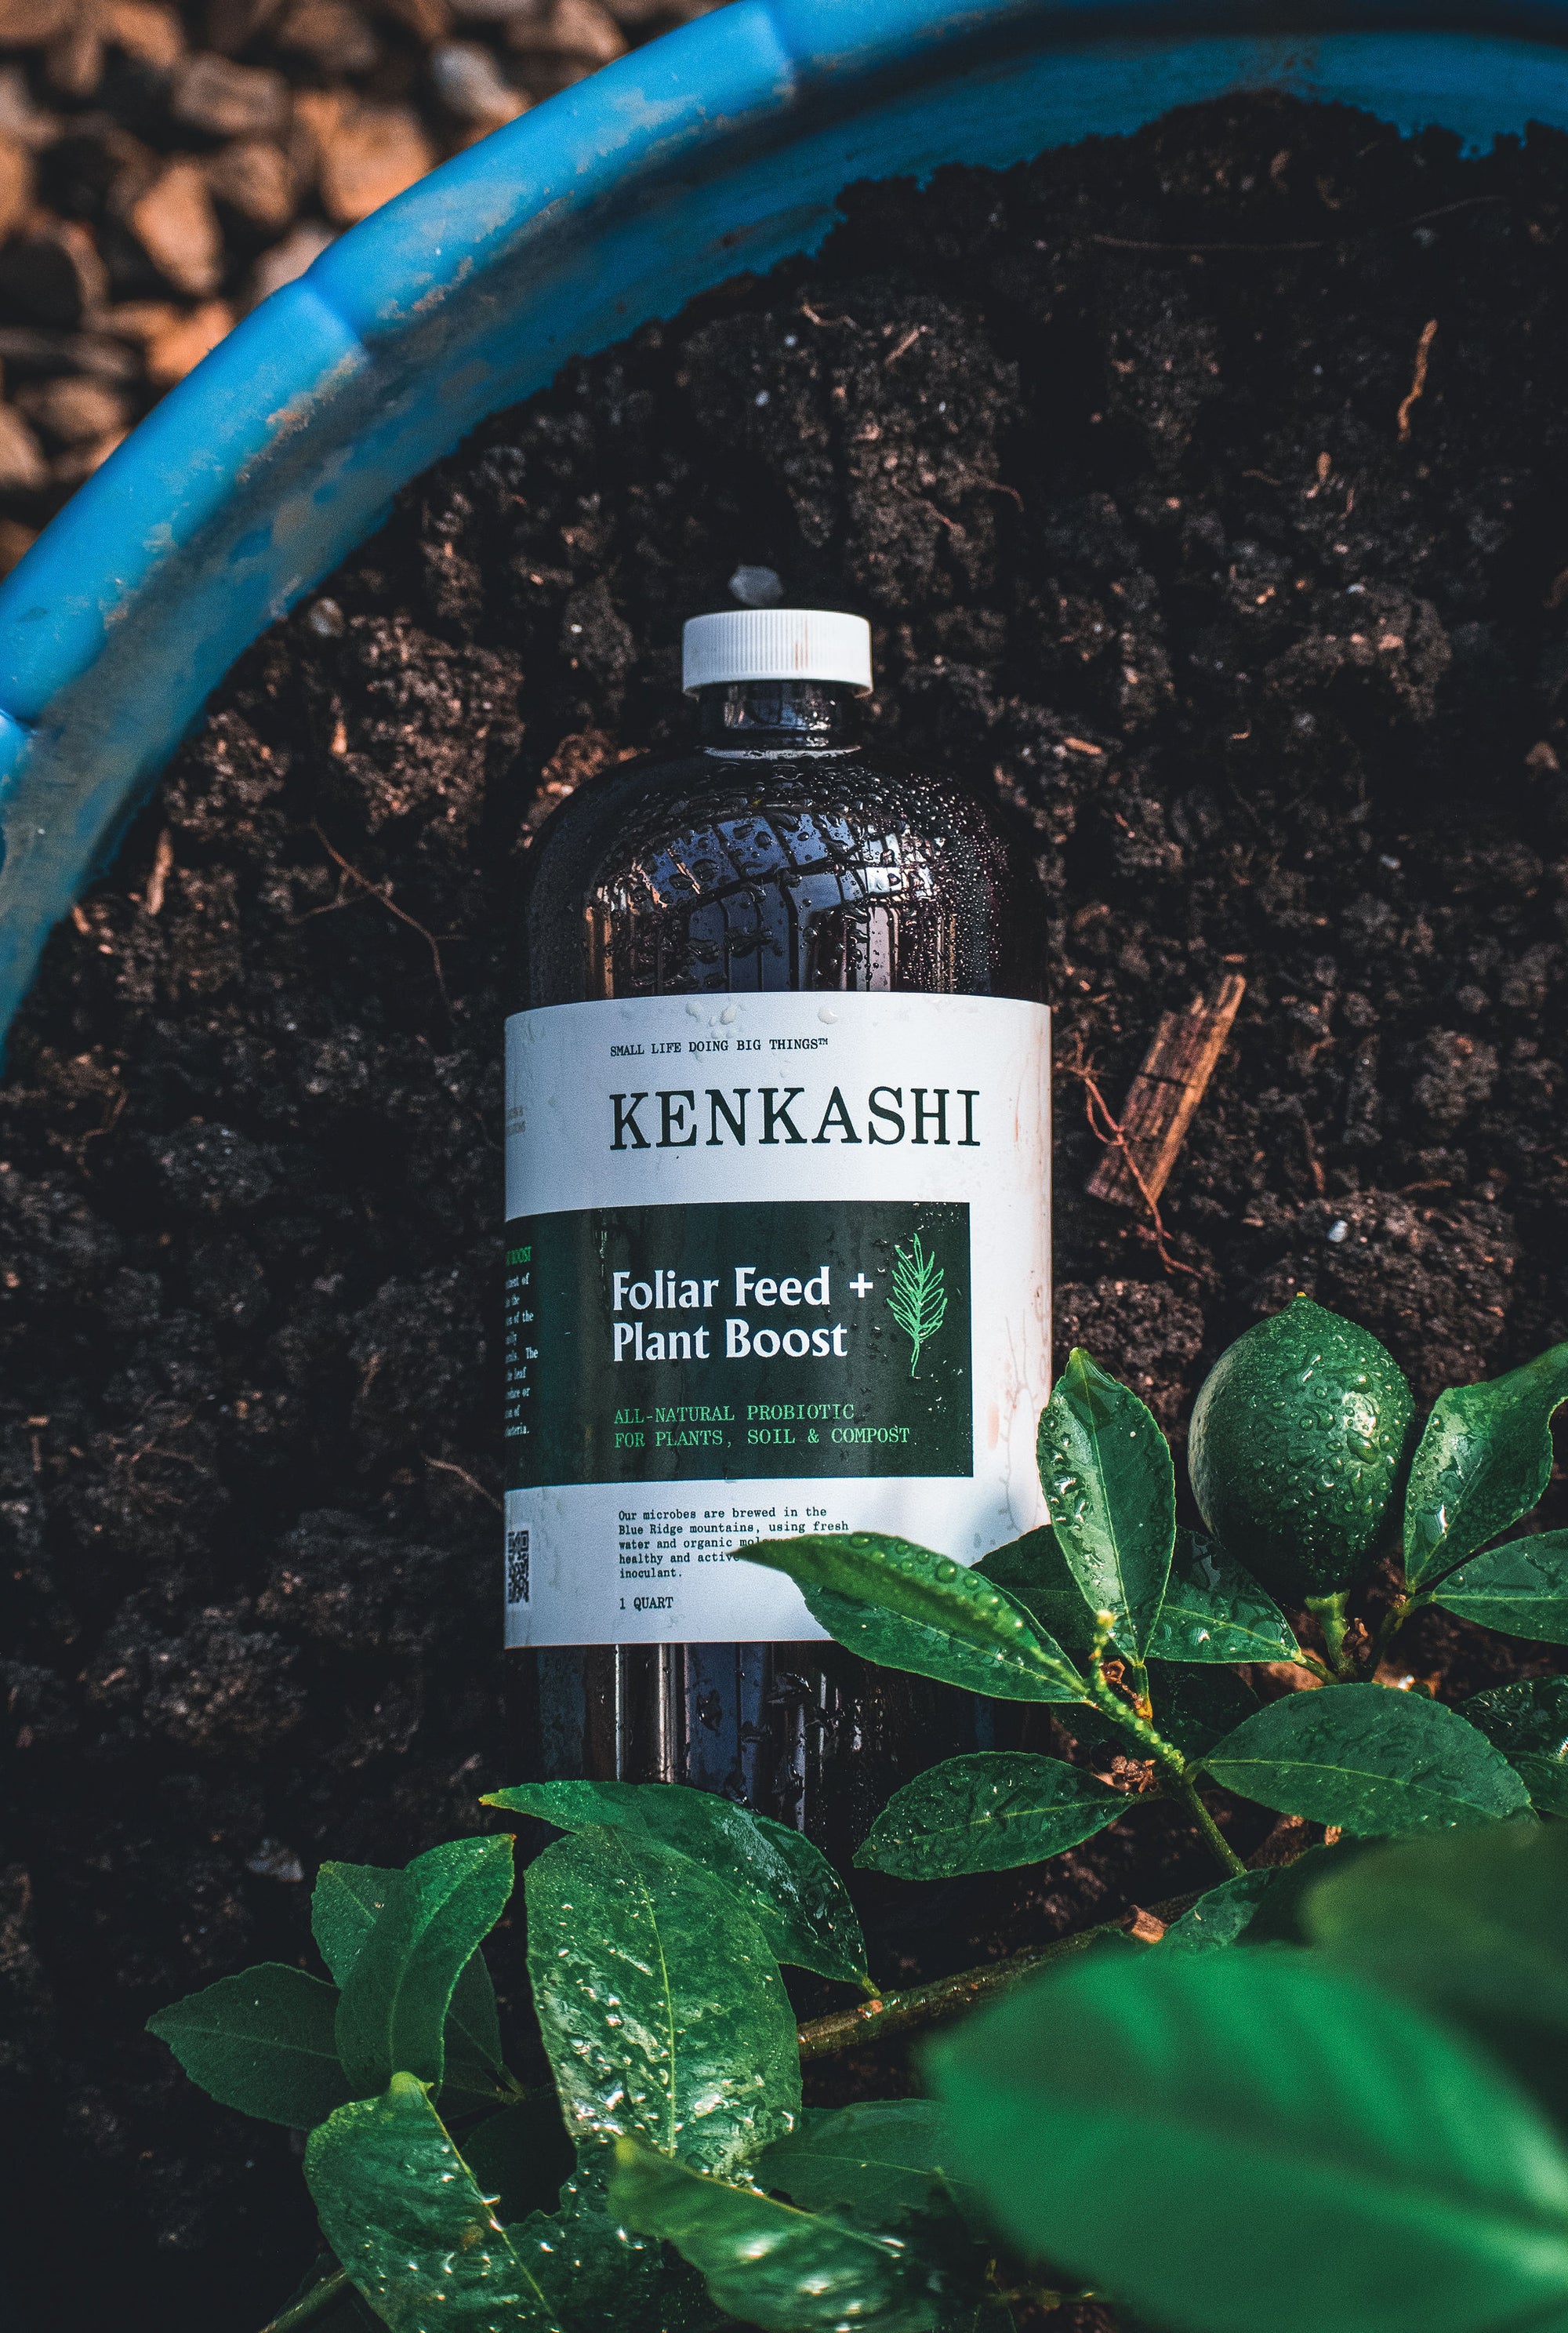 Foliar feed and plant boost Kenkashi liquid inoculant concentrate bottle in a potted plant with leaves and soil in greenhouse